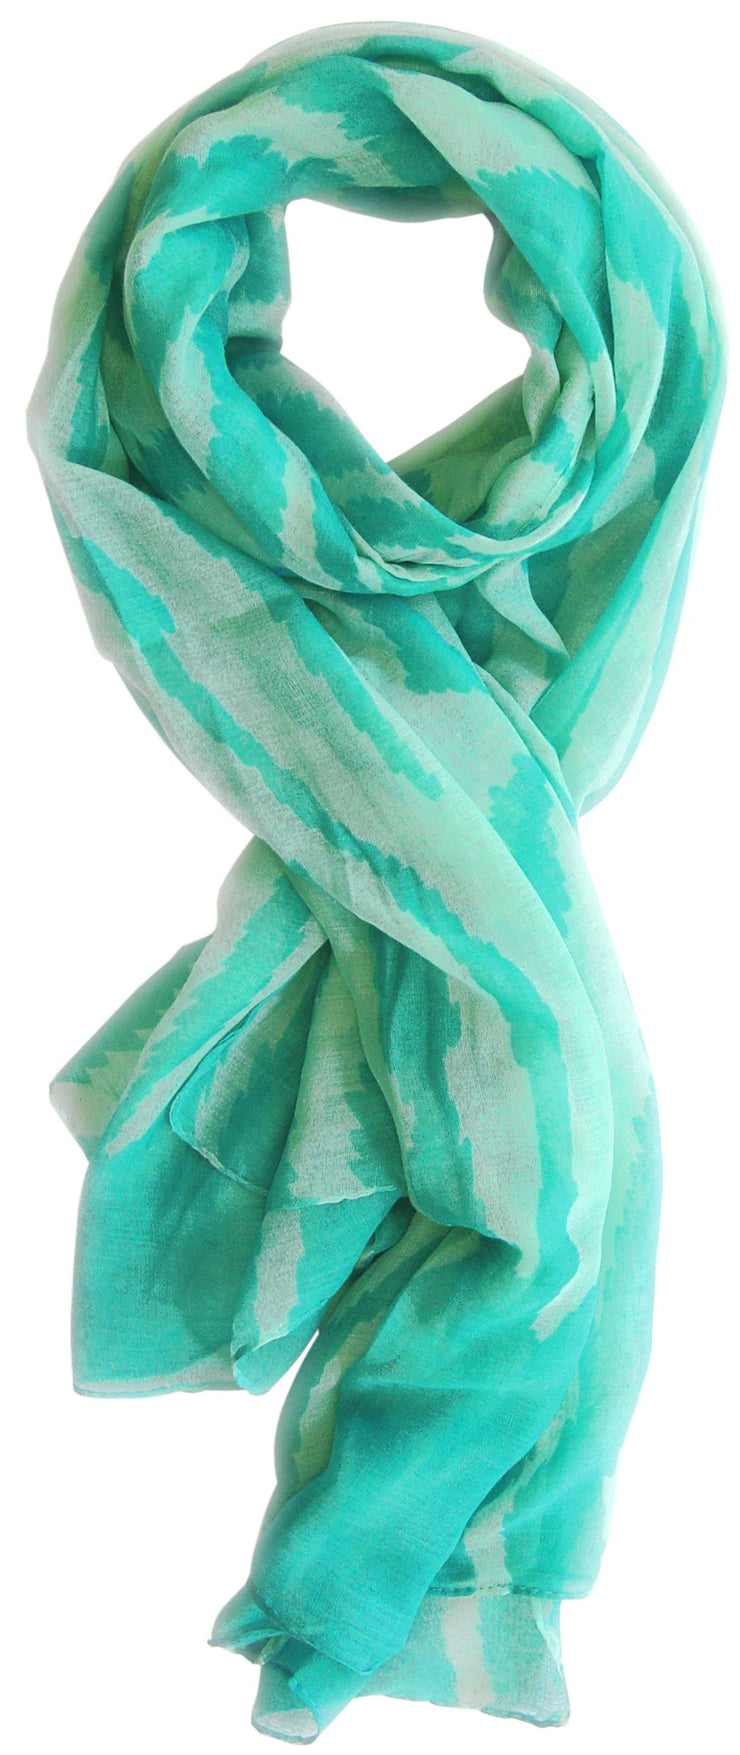 A1511-Electric-Zebra-Scarf-Turquoise-SM